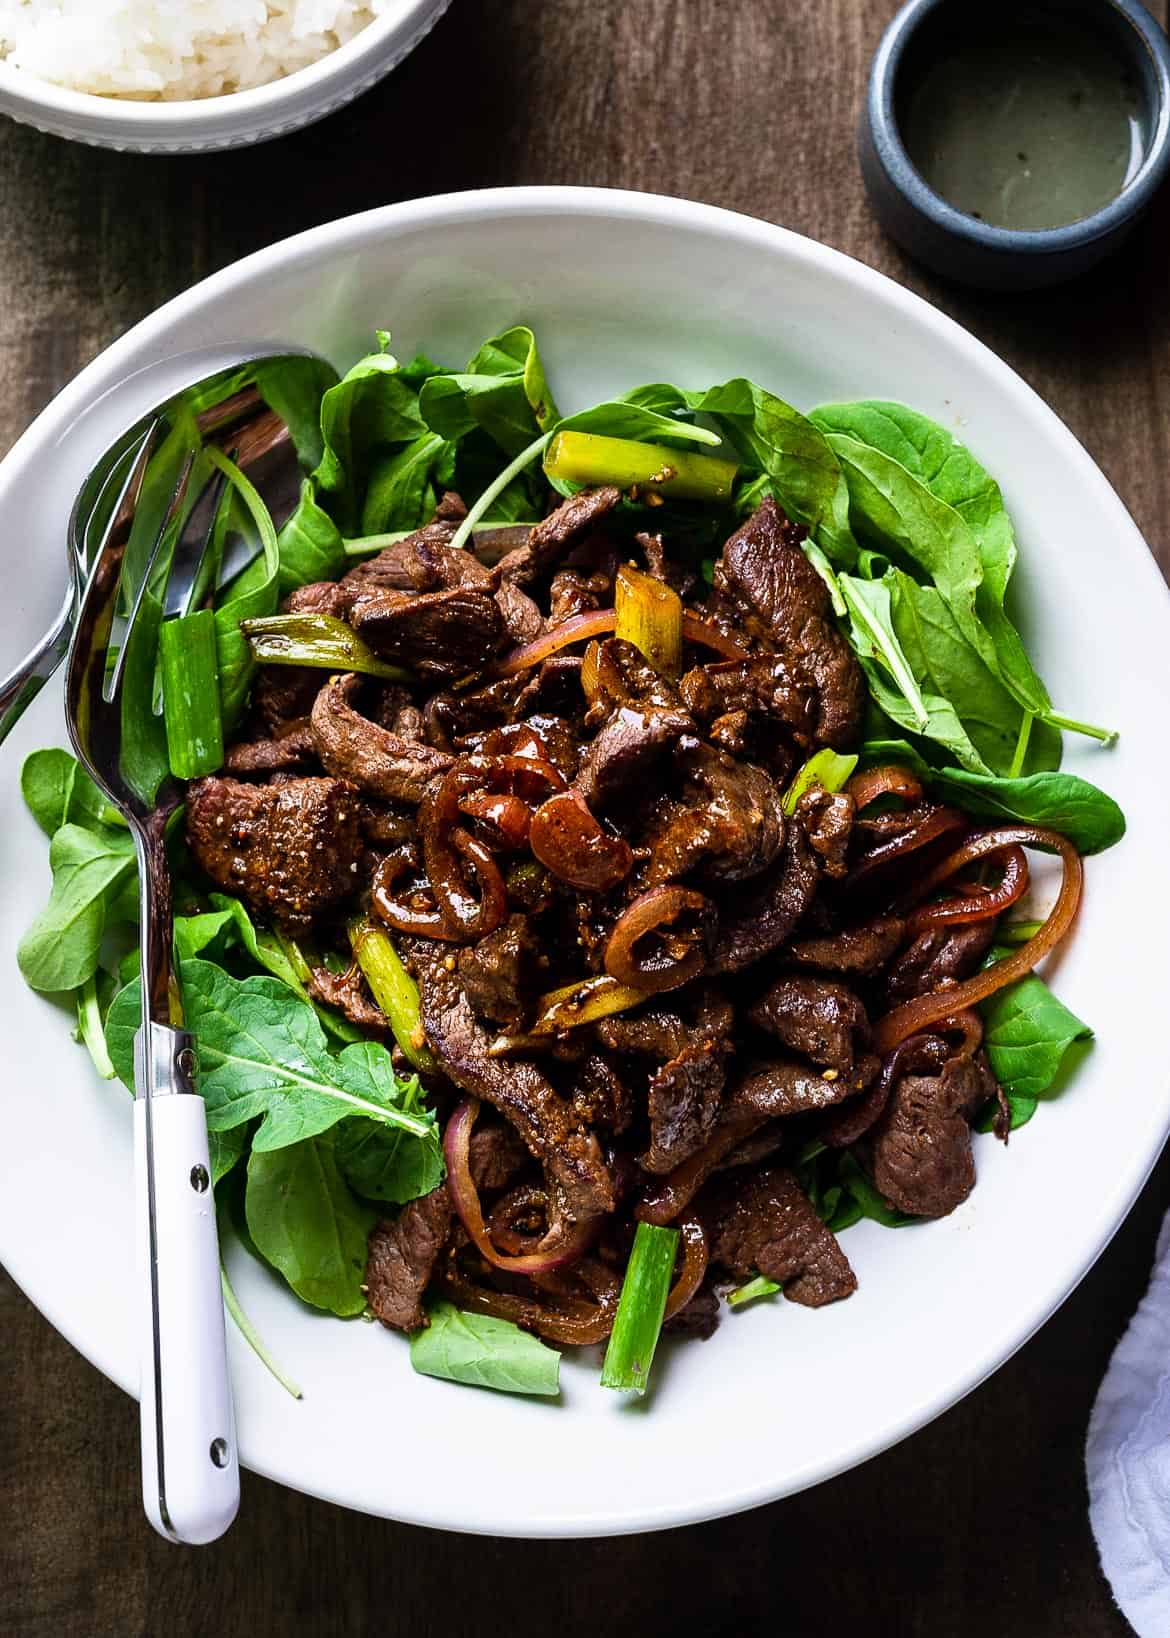 Strips of stir-fried beef, caramelized onions, and sauce served over fresh greens.